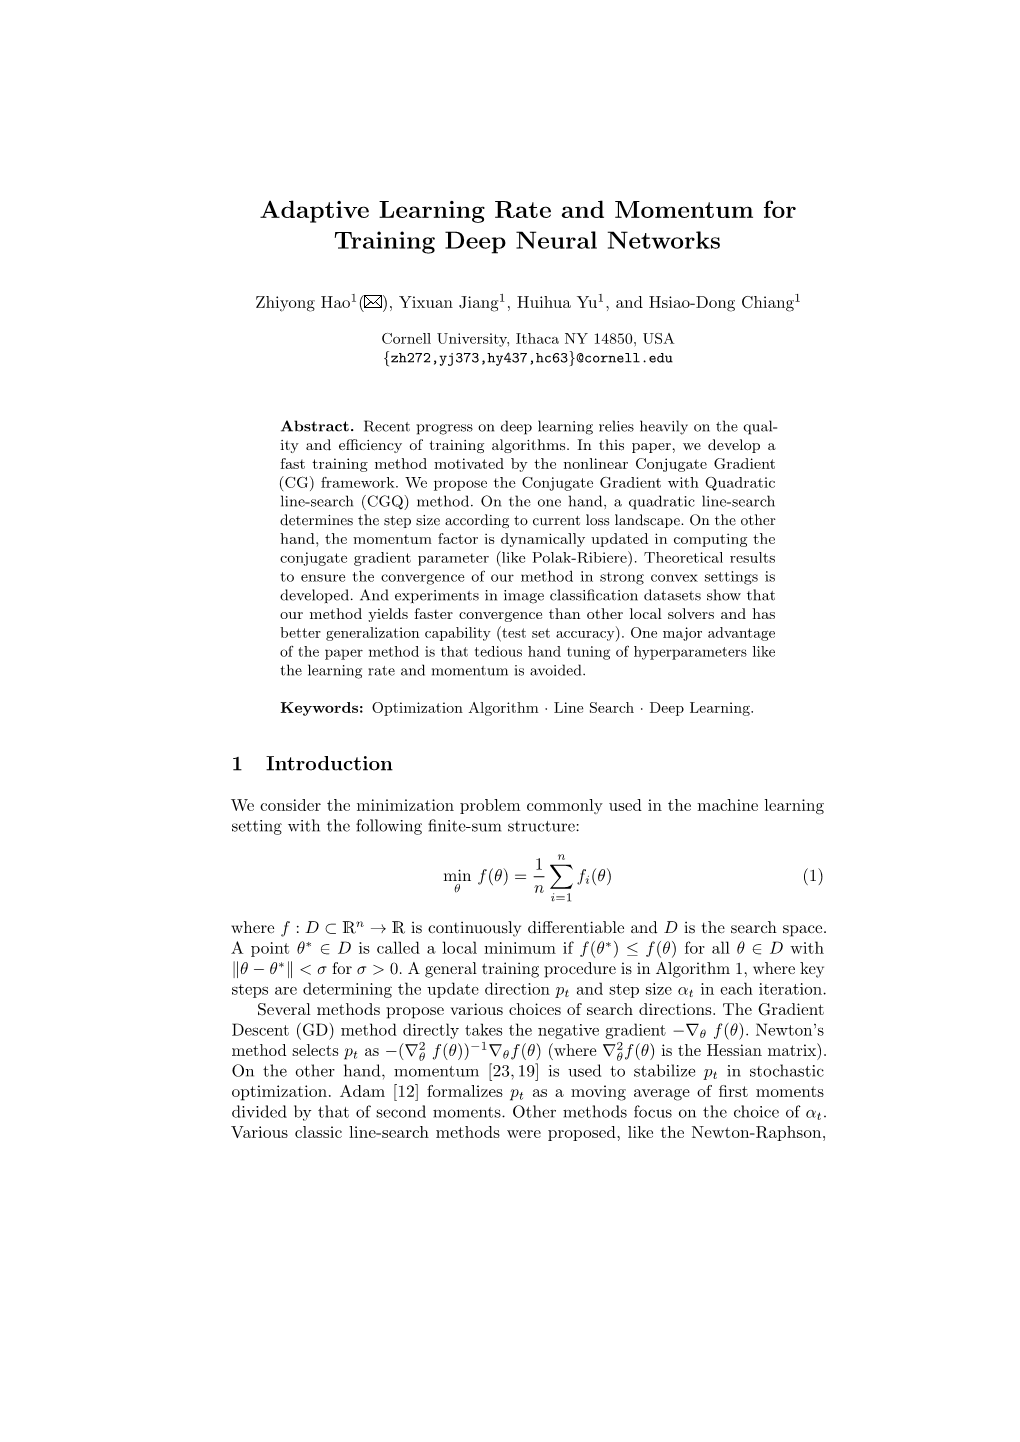 Adaptive Learning Rate and Momentum for Training Deep Neural Networks